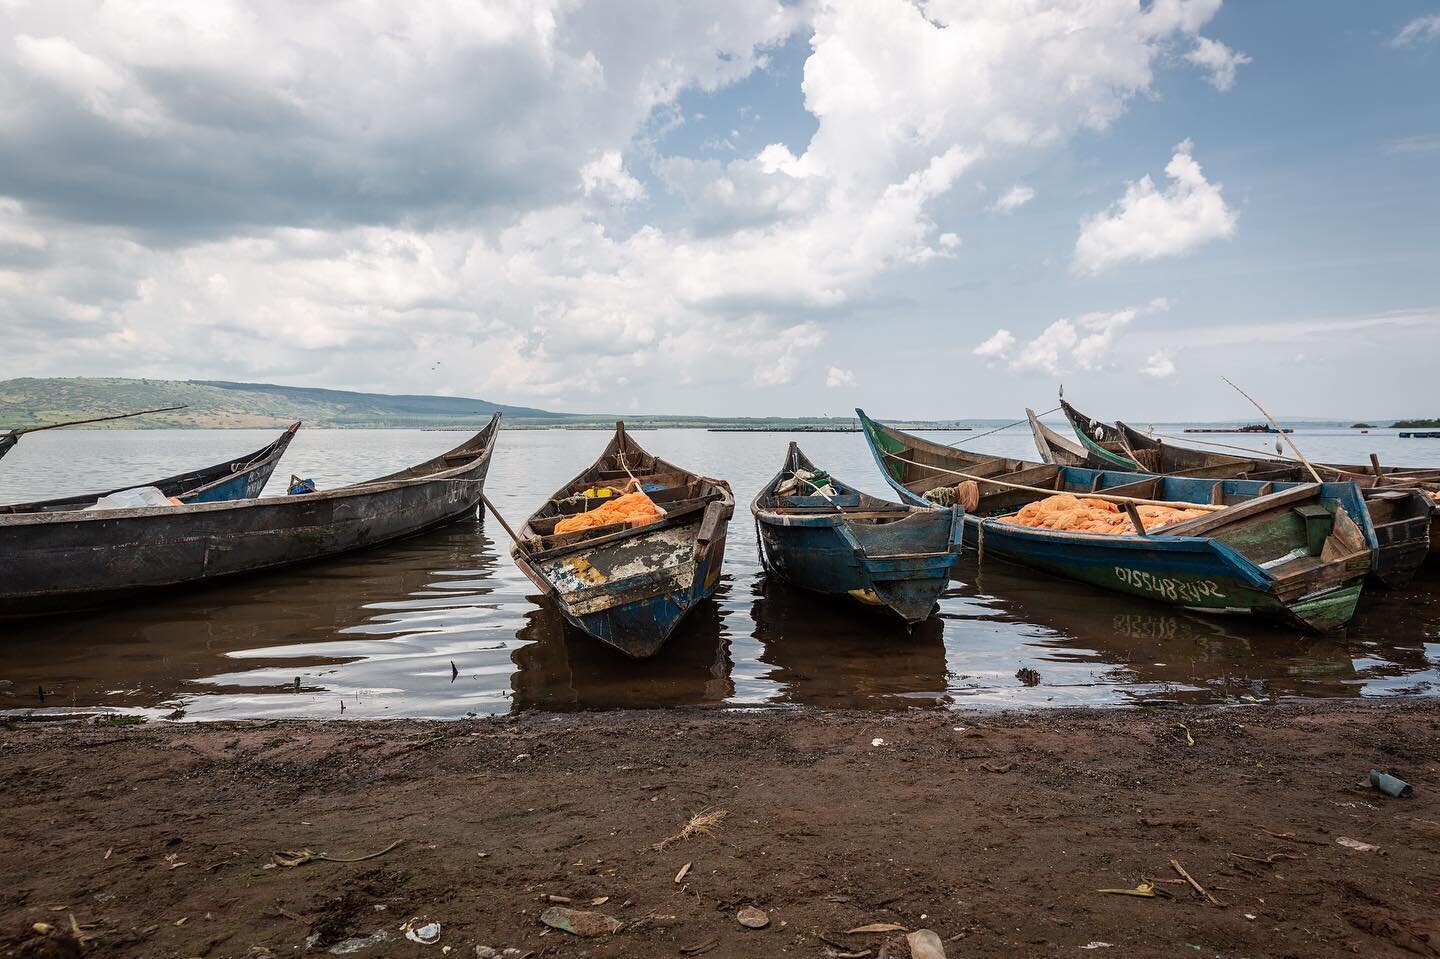 Down by the lake today, visiting the fishing villages of Musoli. These villages are made up of diverse people, with many living there only temporarily. It&rsquo;s a completely different life compared to that in the main village.

On assignment for @p